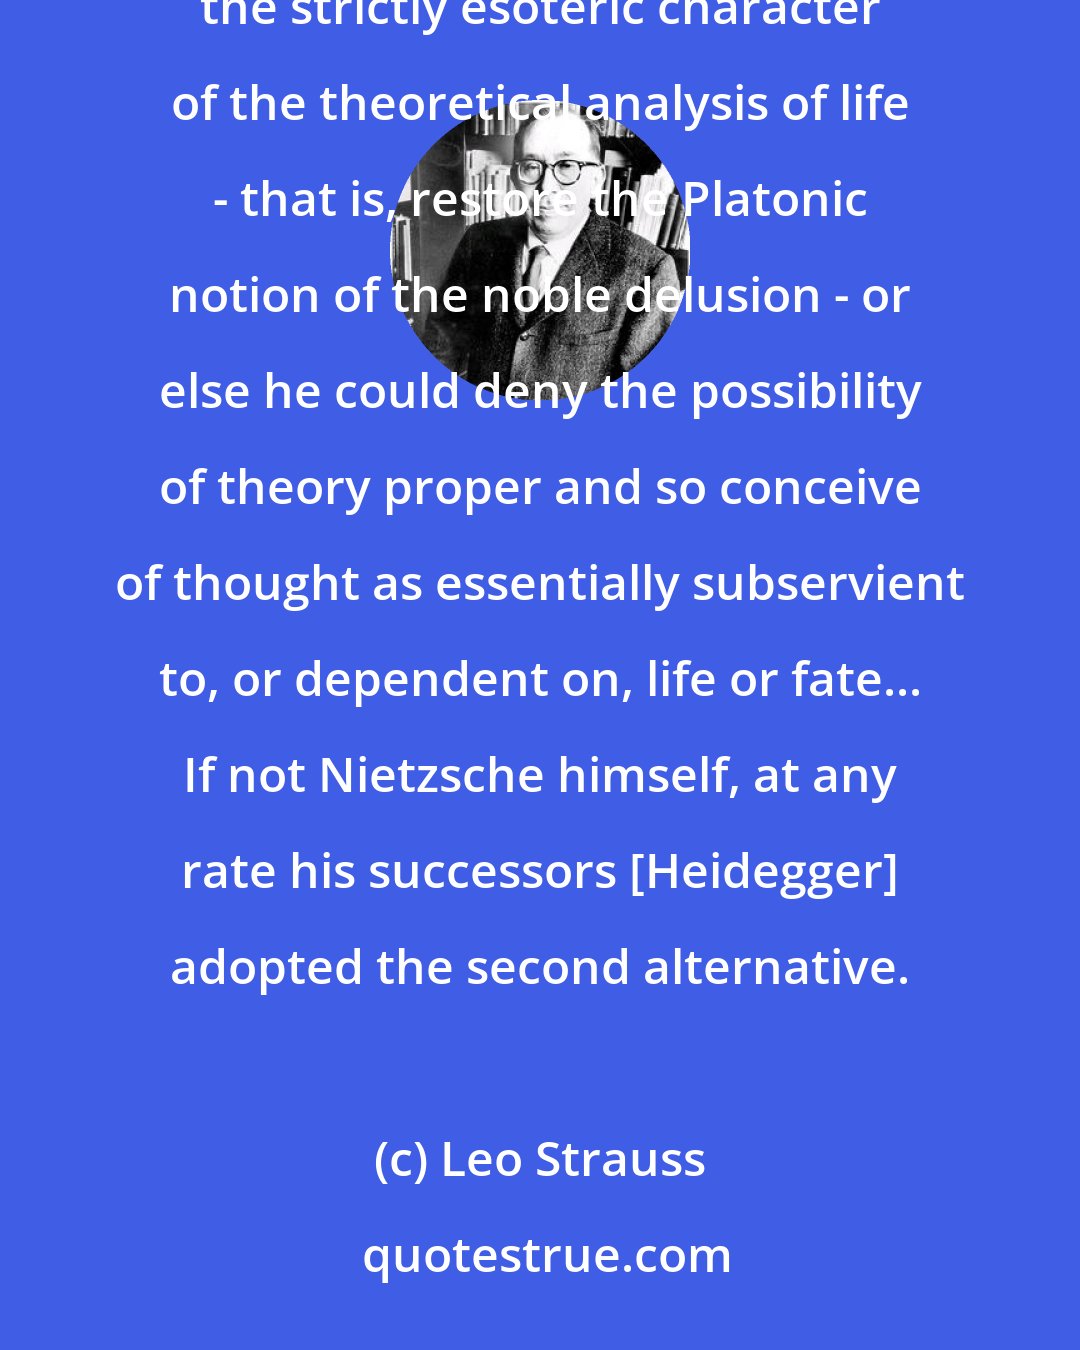 Leo Strauss: To avert the danger [posed by theory] to life, Nietzsche could choose one of two ways: he could insist on the strictly esoteric character of the theoretical analysis of life - that is, restore the Platonic notion of the noble delusion - or else he could deny the possibility of theory proper and so conceive of thought as essentially subservient to, or dependent on, life or fate... If not Nietzsche himself, at any rate his successors [Heidegger] adopted the second alternative.